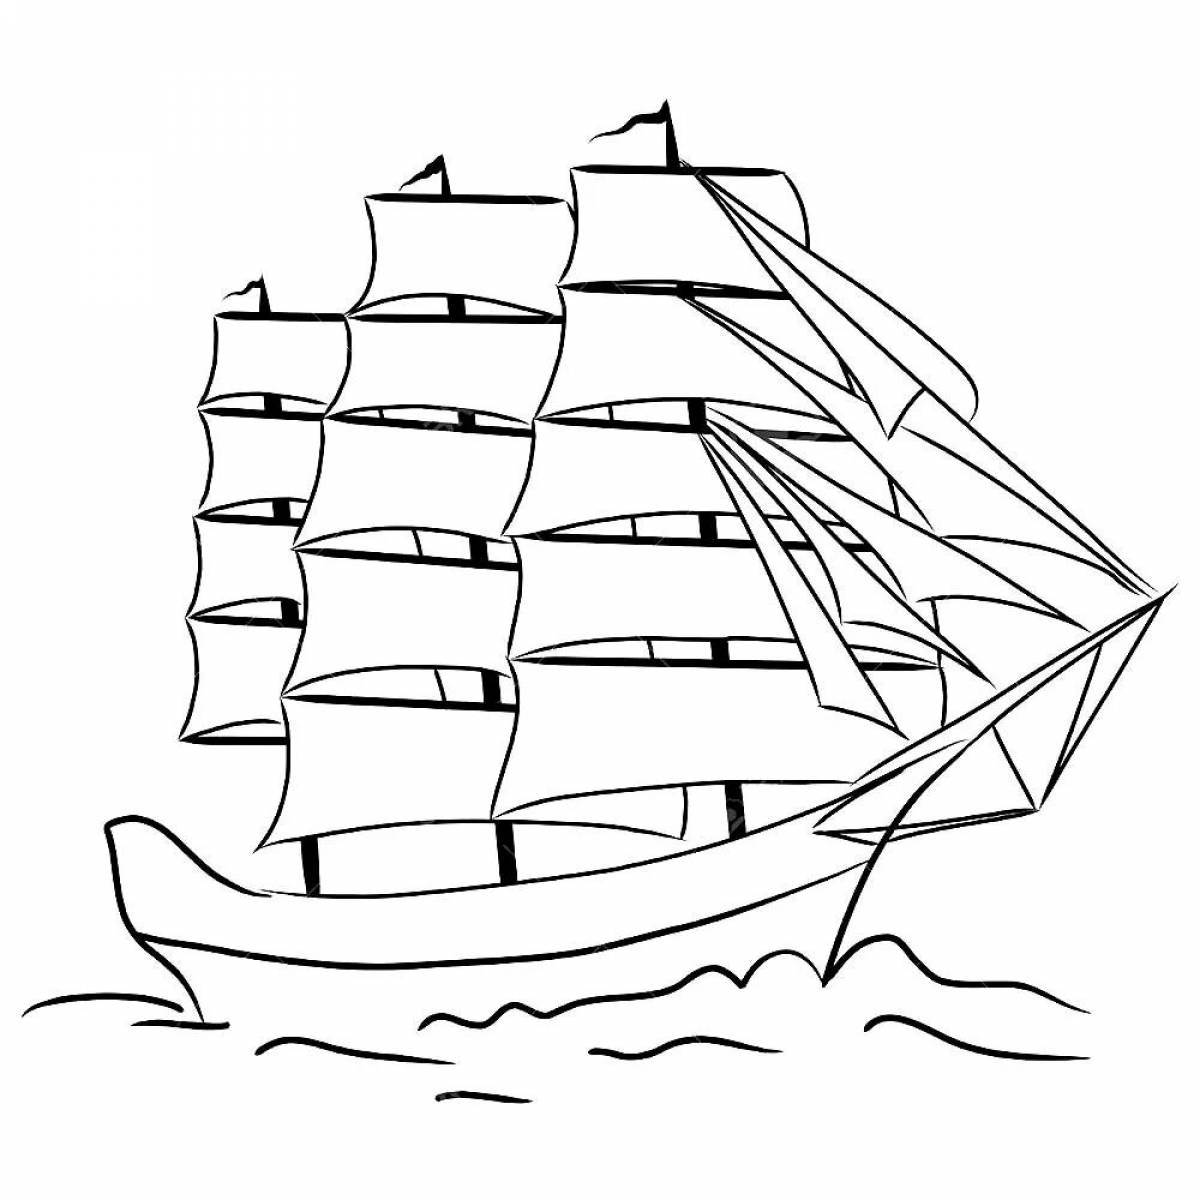 Colorfully painted scarlet sails Grade 6 coloring book